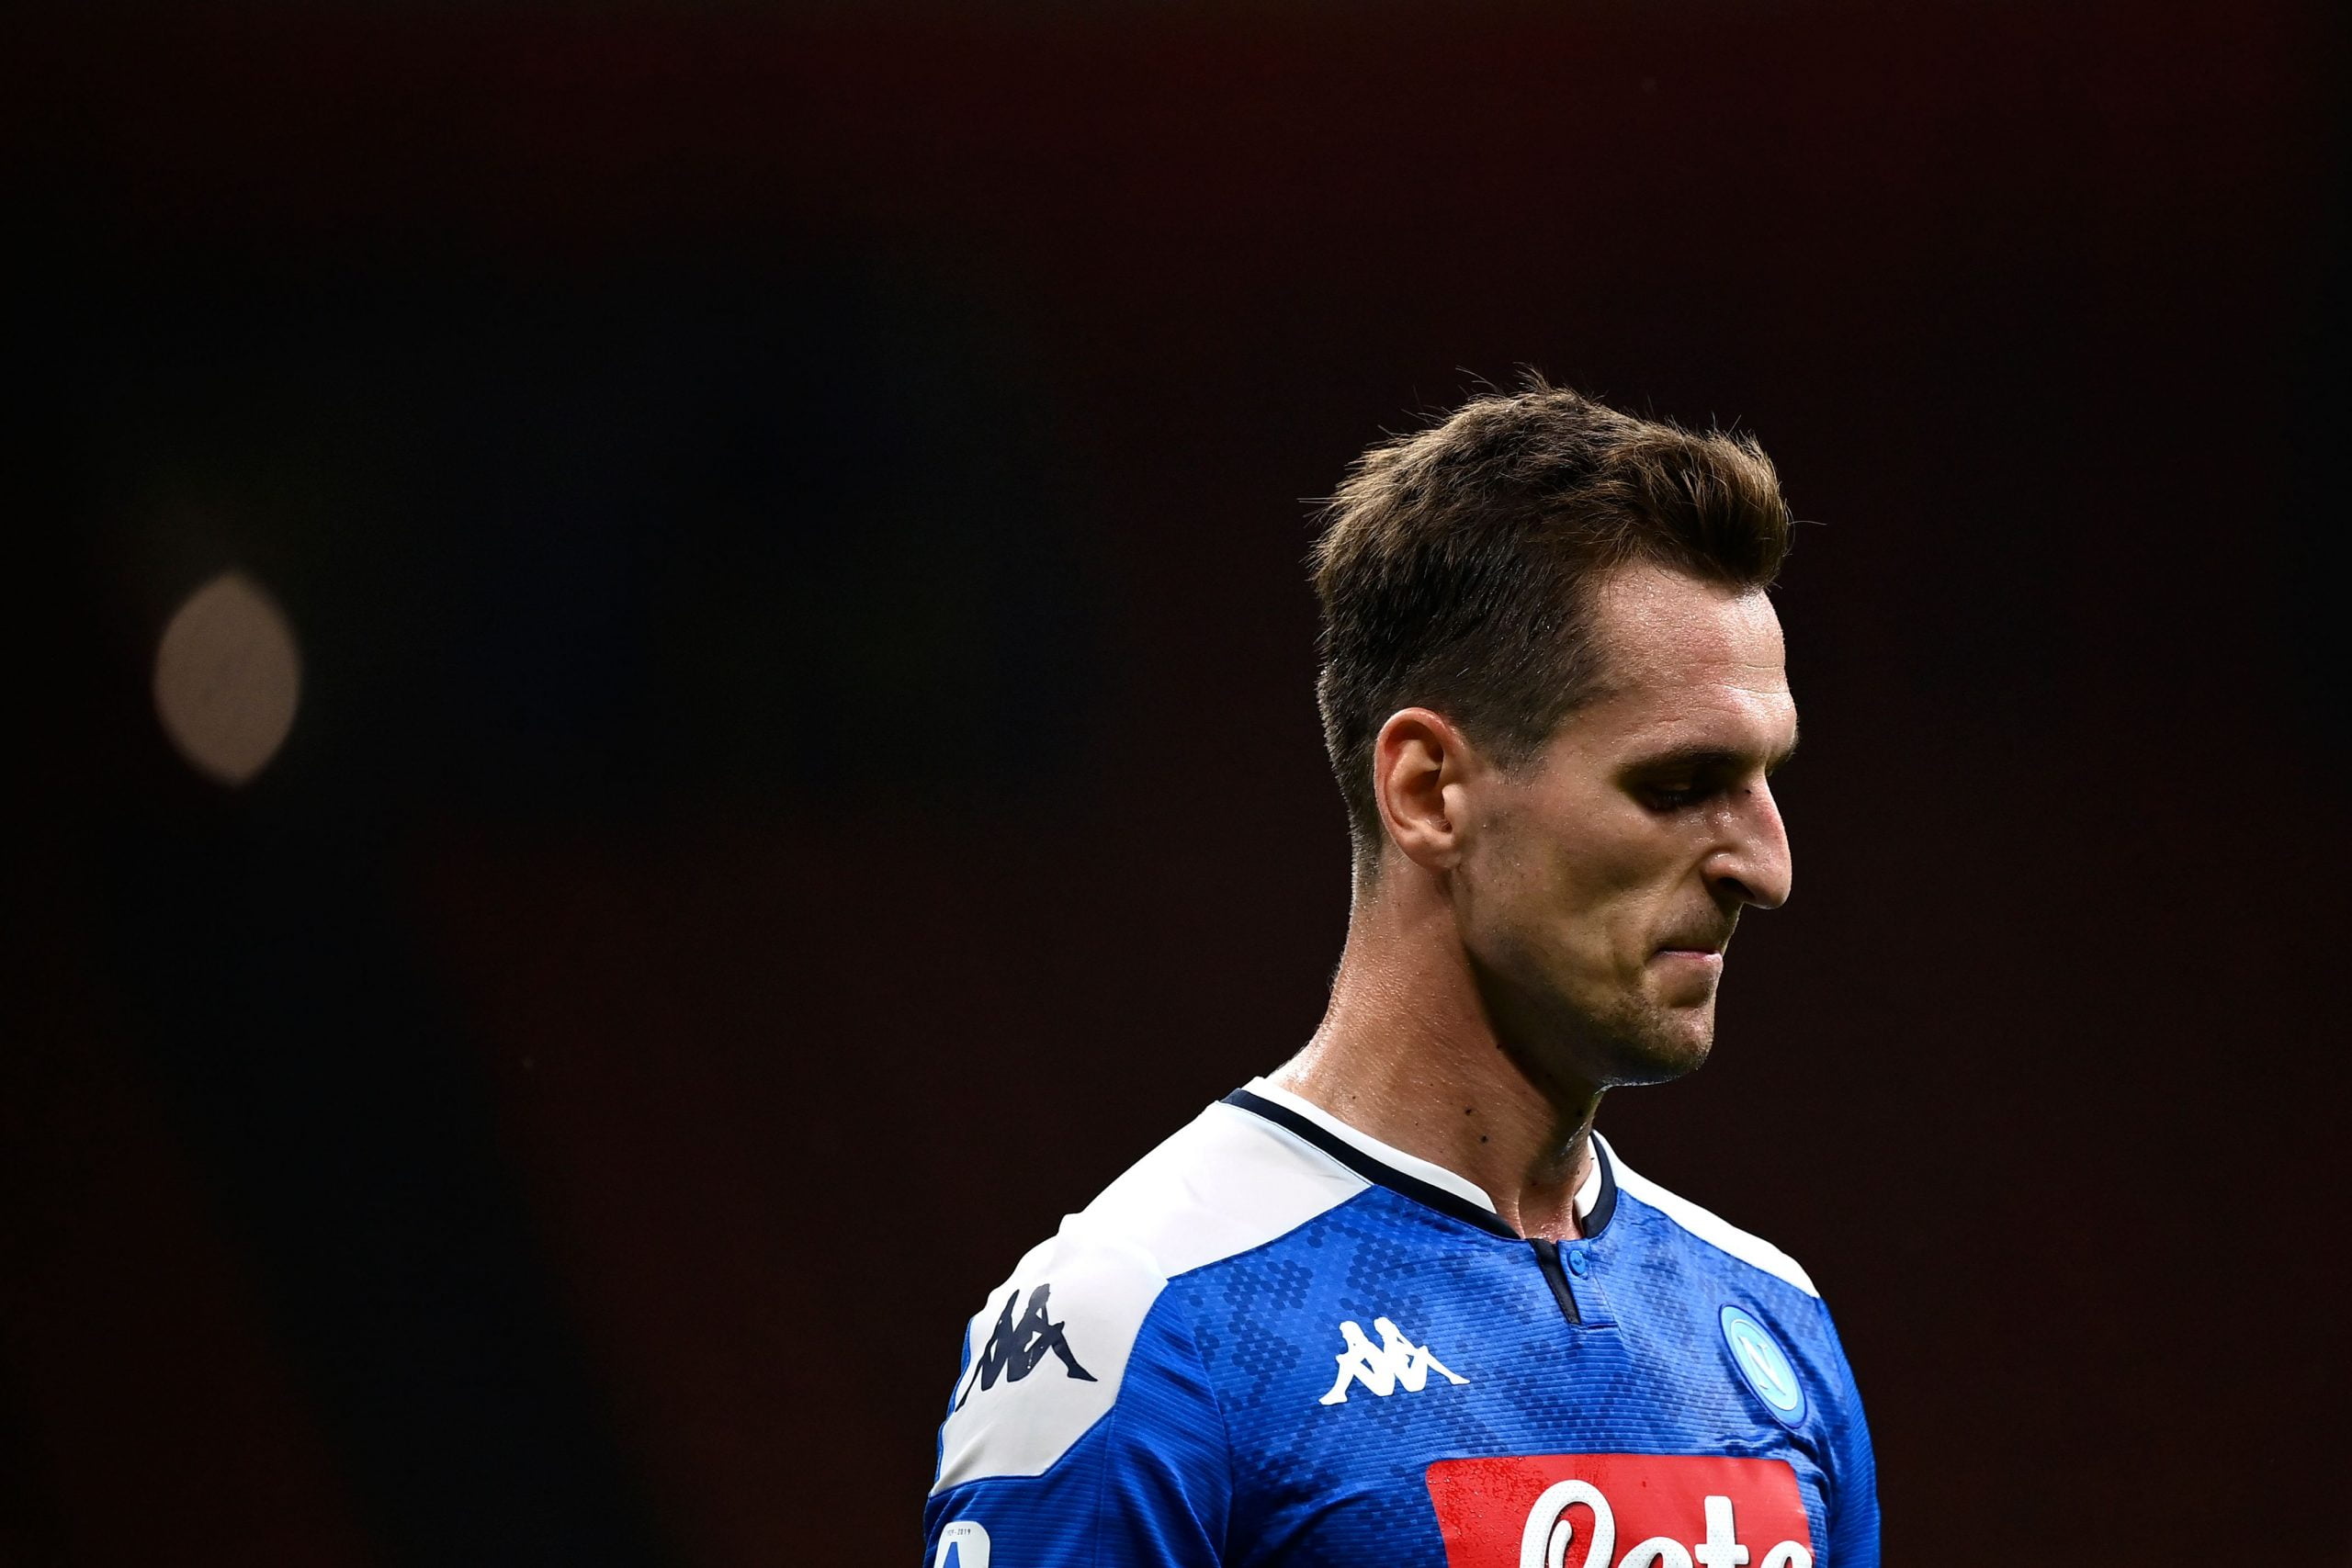 Tottenham Hotspur facing fierce competition in pursuit of Milik who is seen in the photo